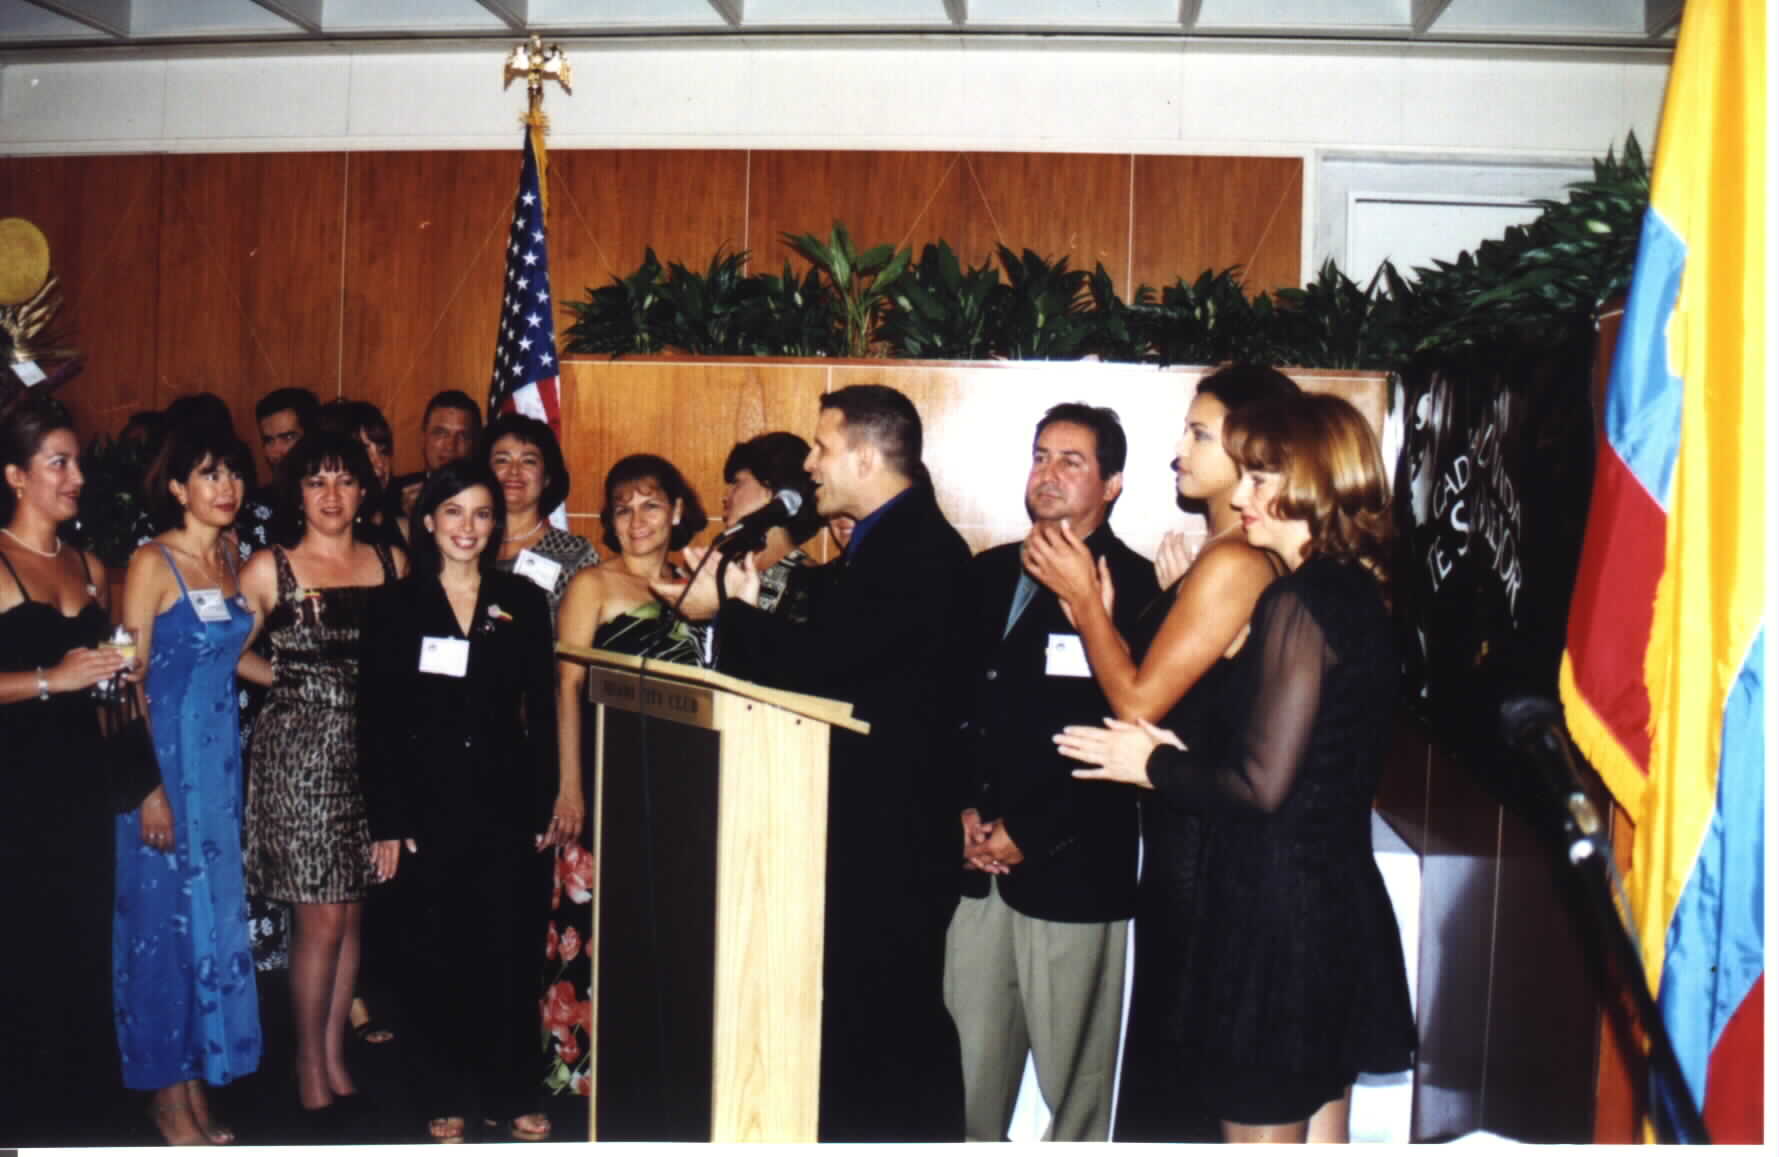 Picture photographed by Noe Dorestant: Member of the Board of Directors of CASA,
International Esquire, Jaime Davila announcing the Simon Bolivar scholarship.
Give credit where credit is due. All rights reserved 2000. 